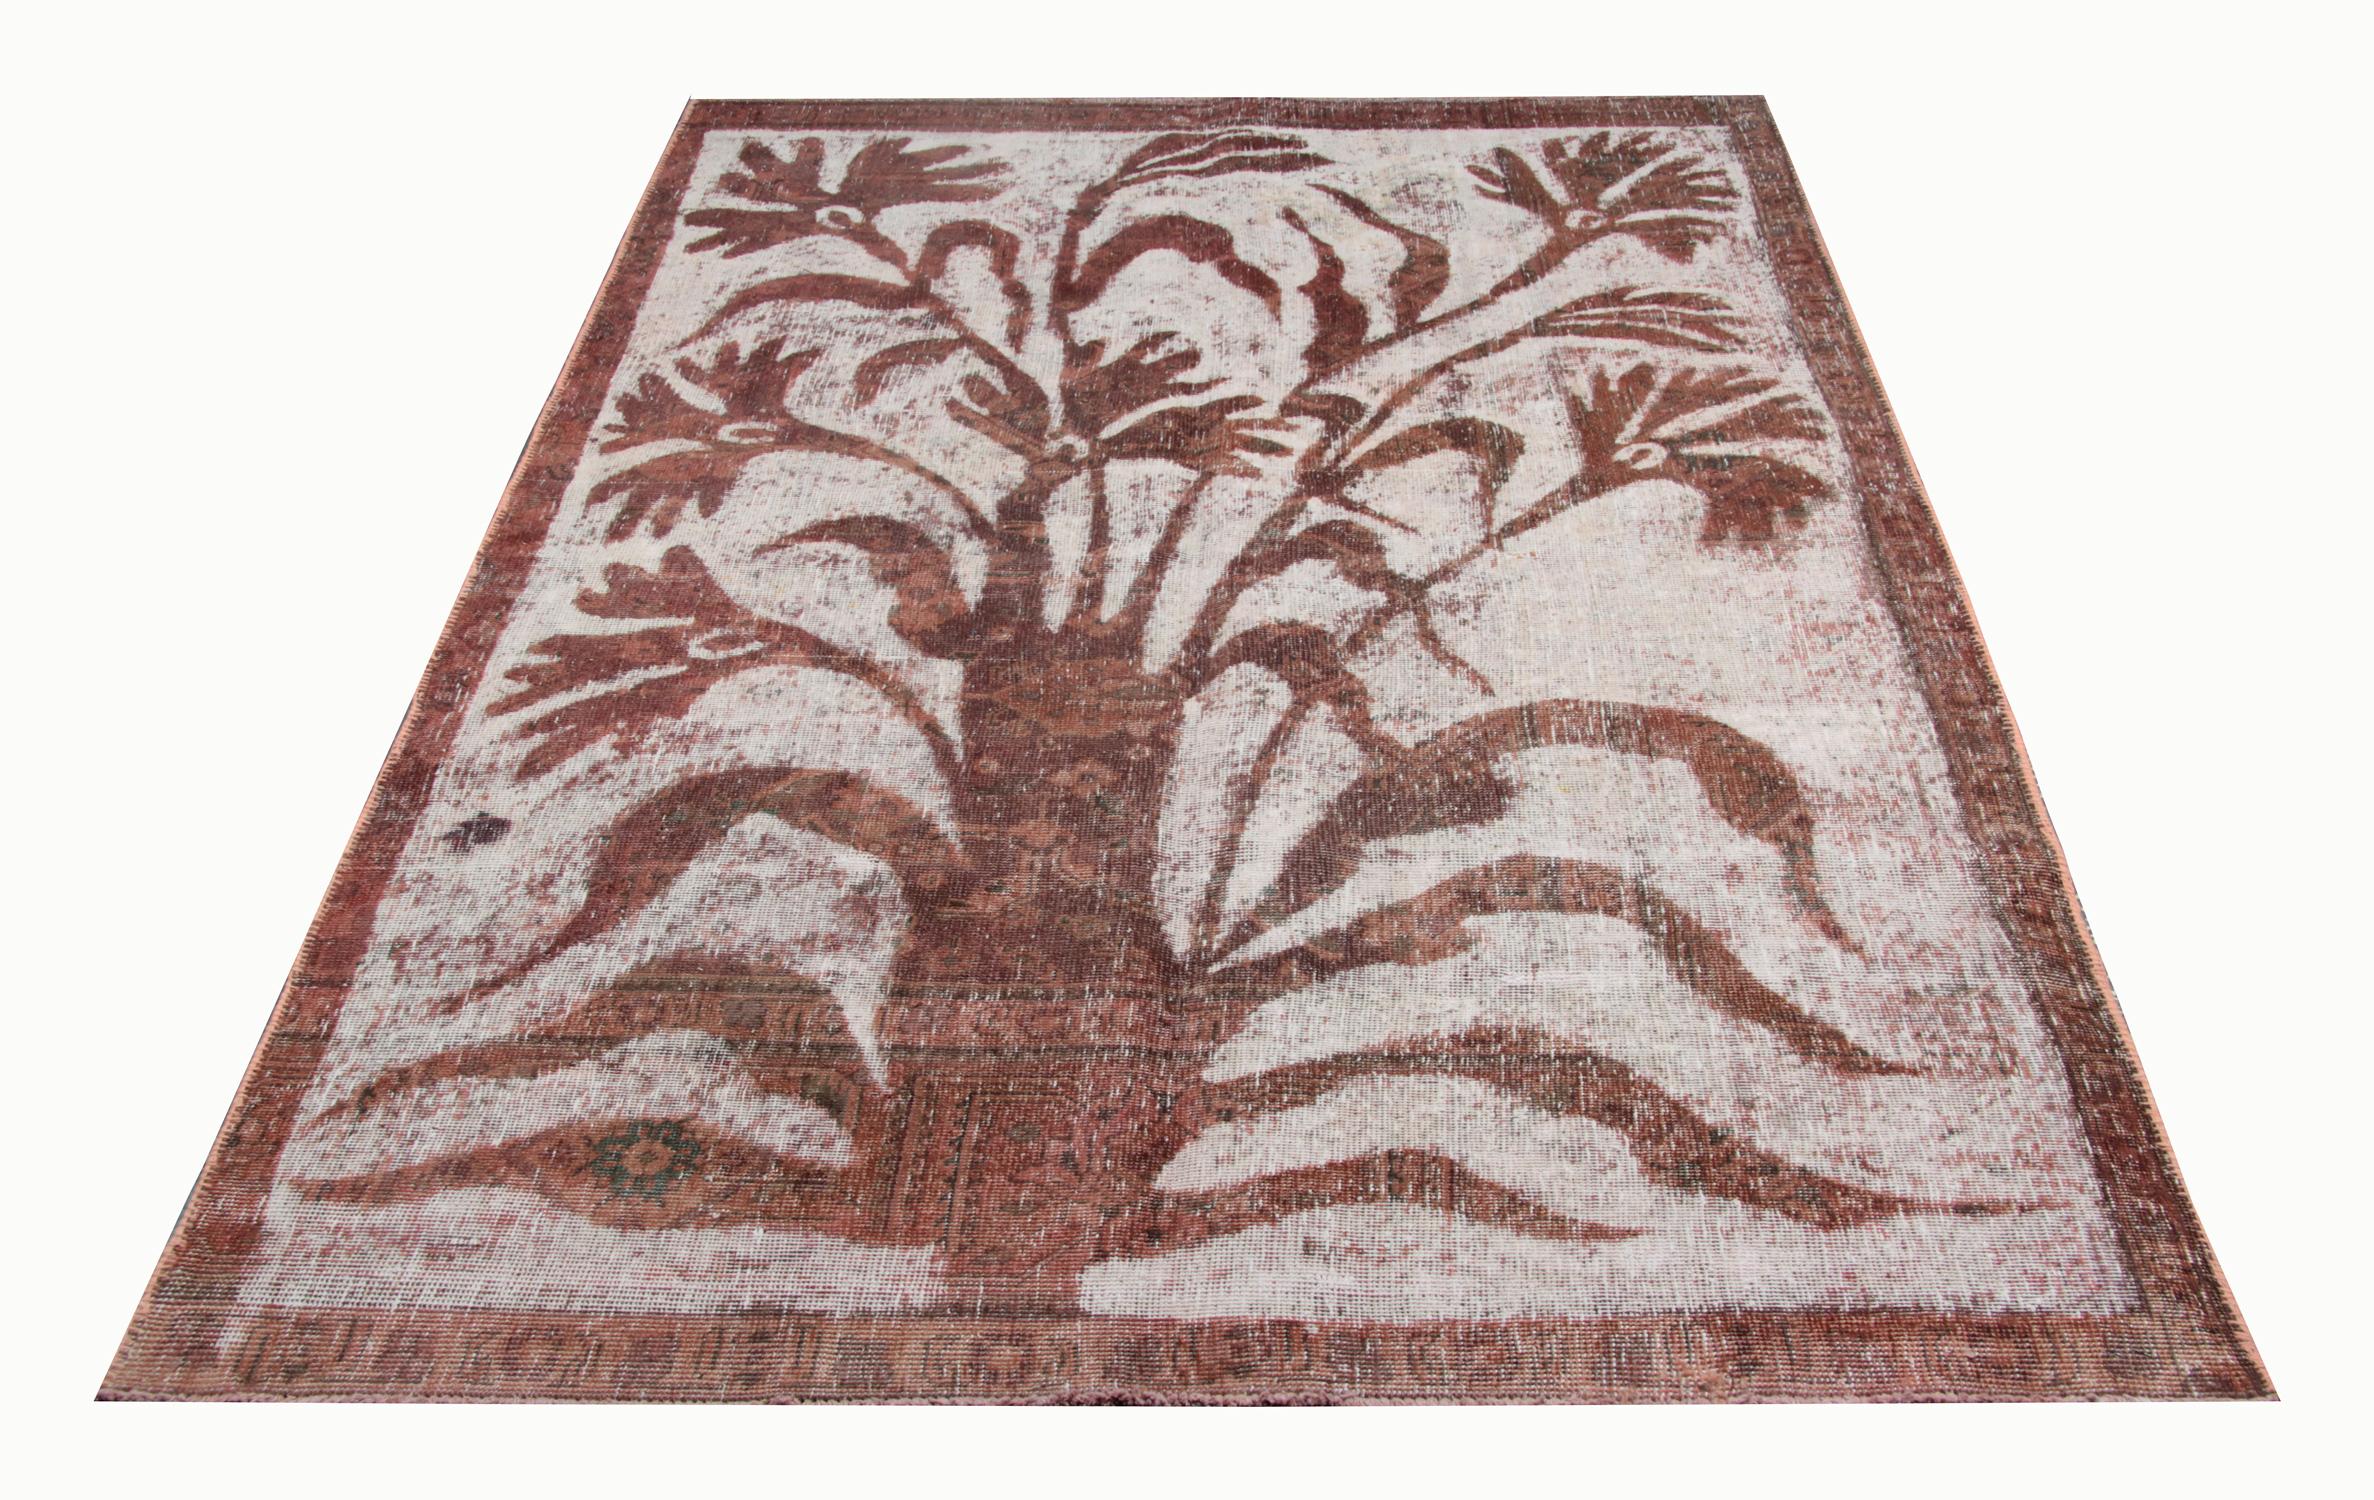 This handwoven vintage Turkish carpet features a hand painted floral red pattern on a white background on this Oriental rug. These floral patterned rugs can be used as the centre of attention in any room and are a fantastic example of Turkish area